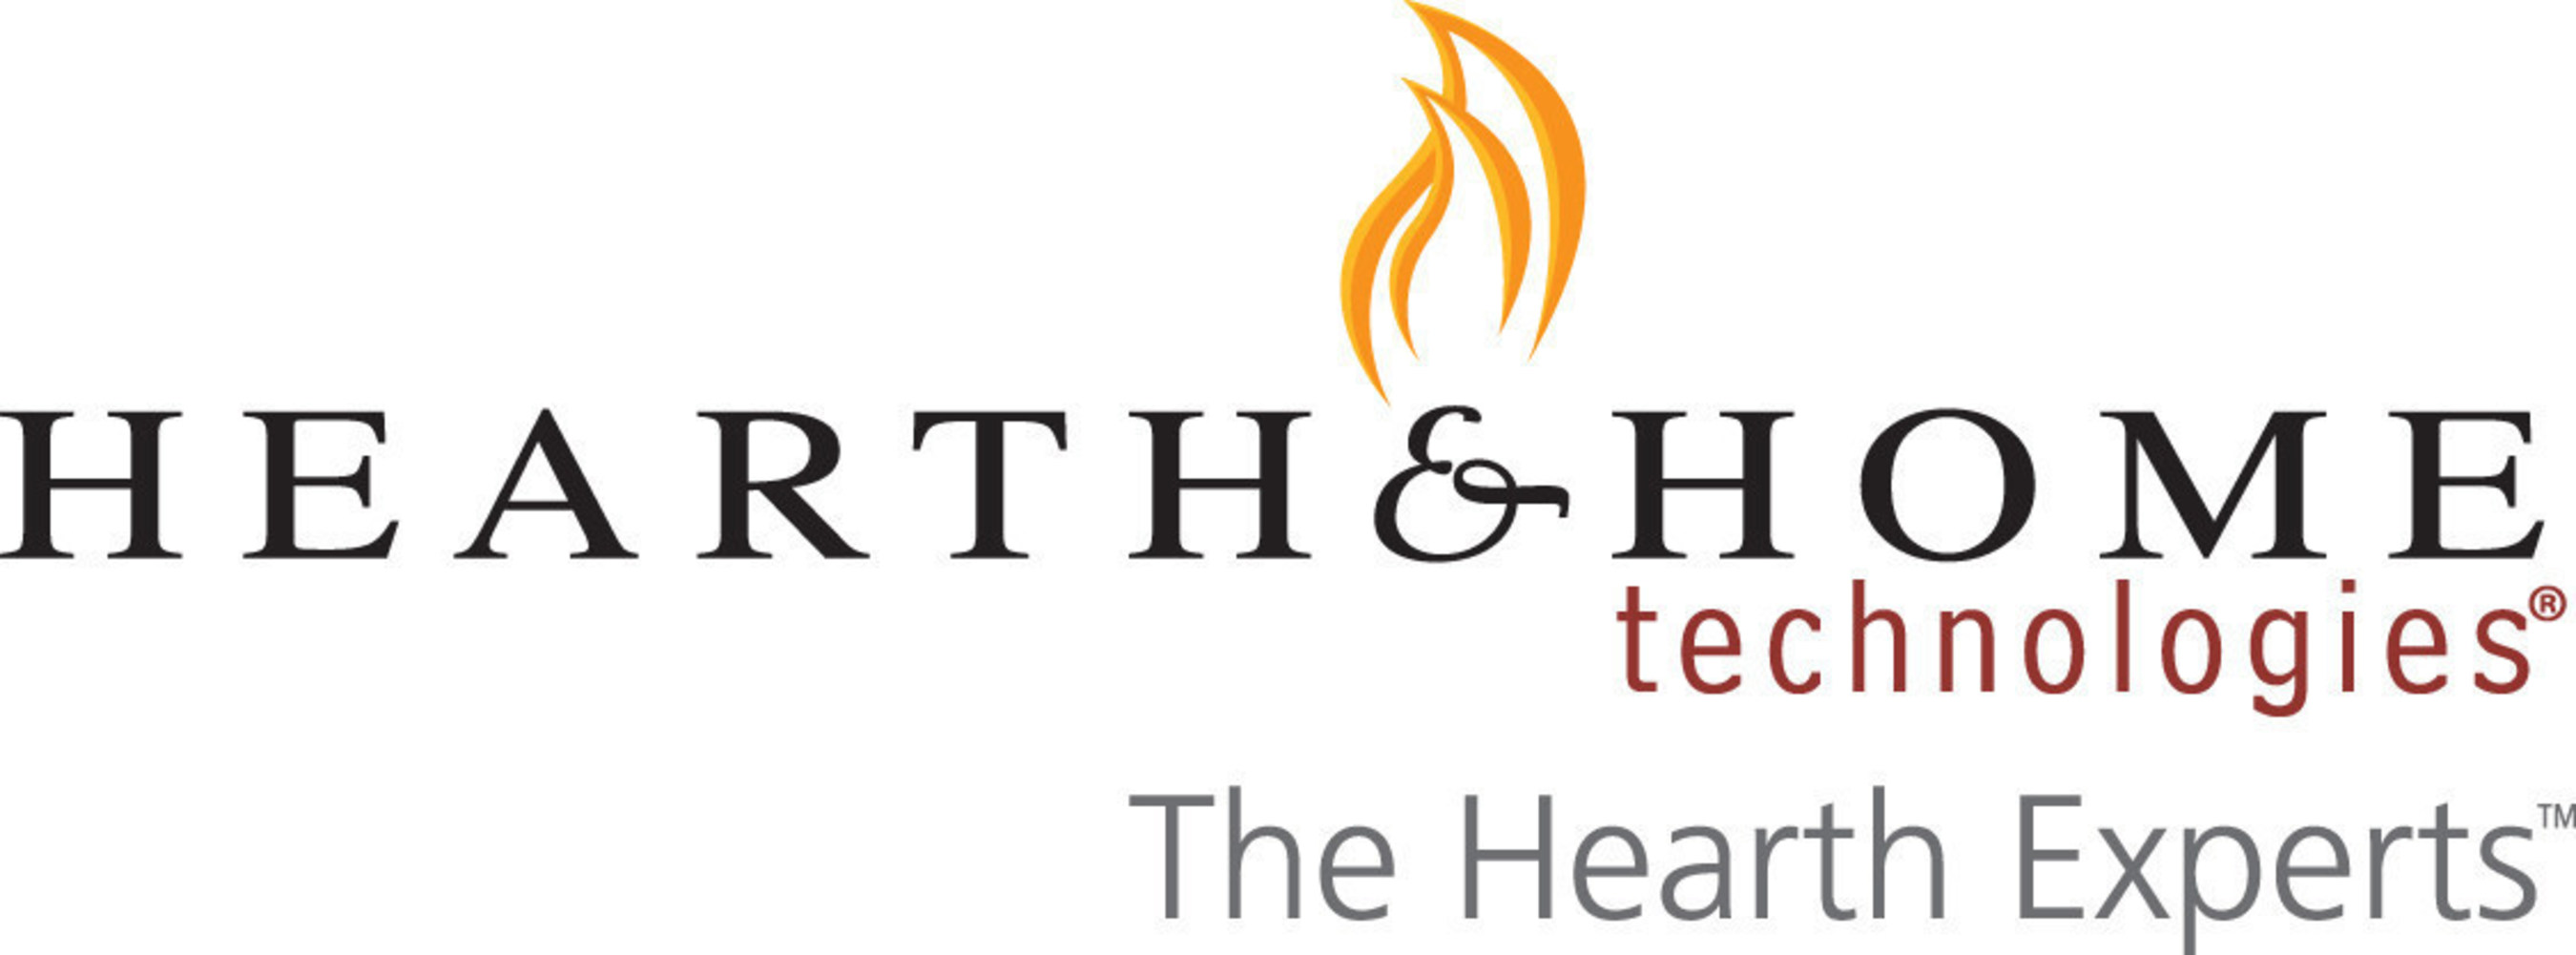 Hearth and Home Technologies